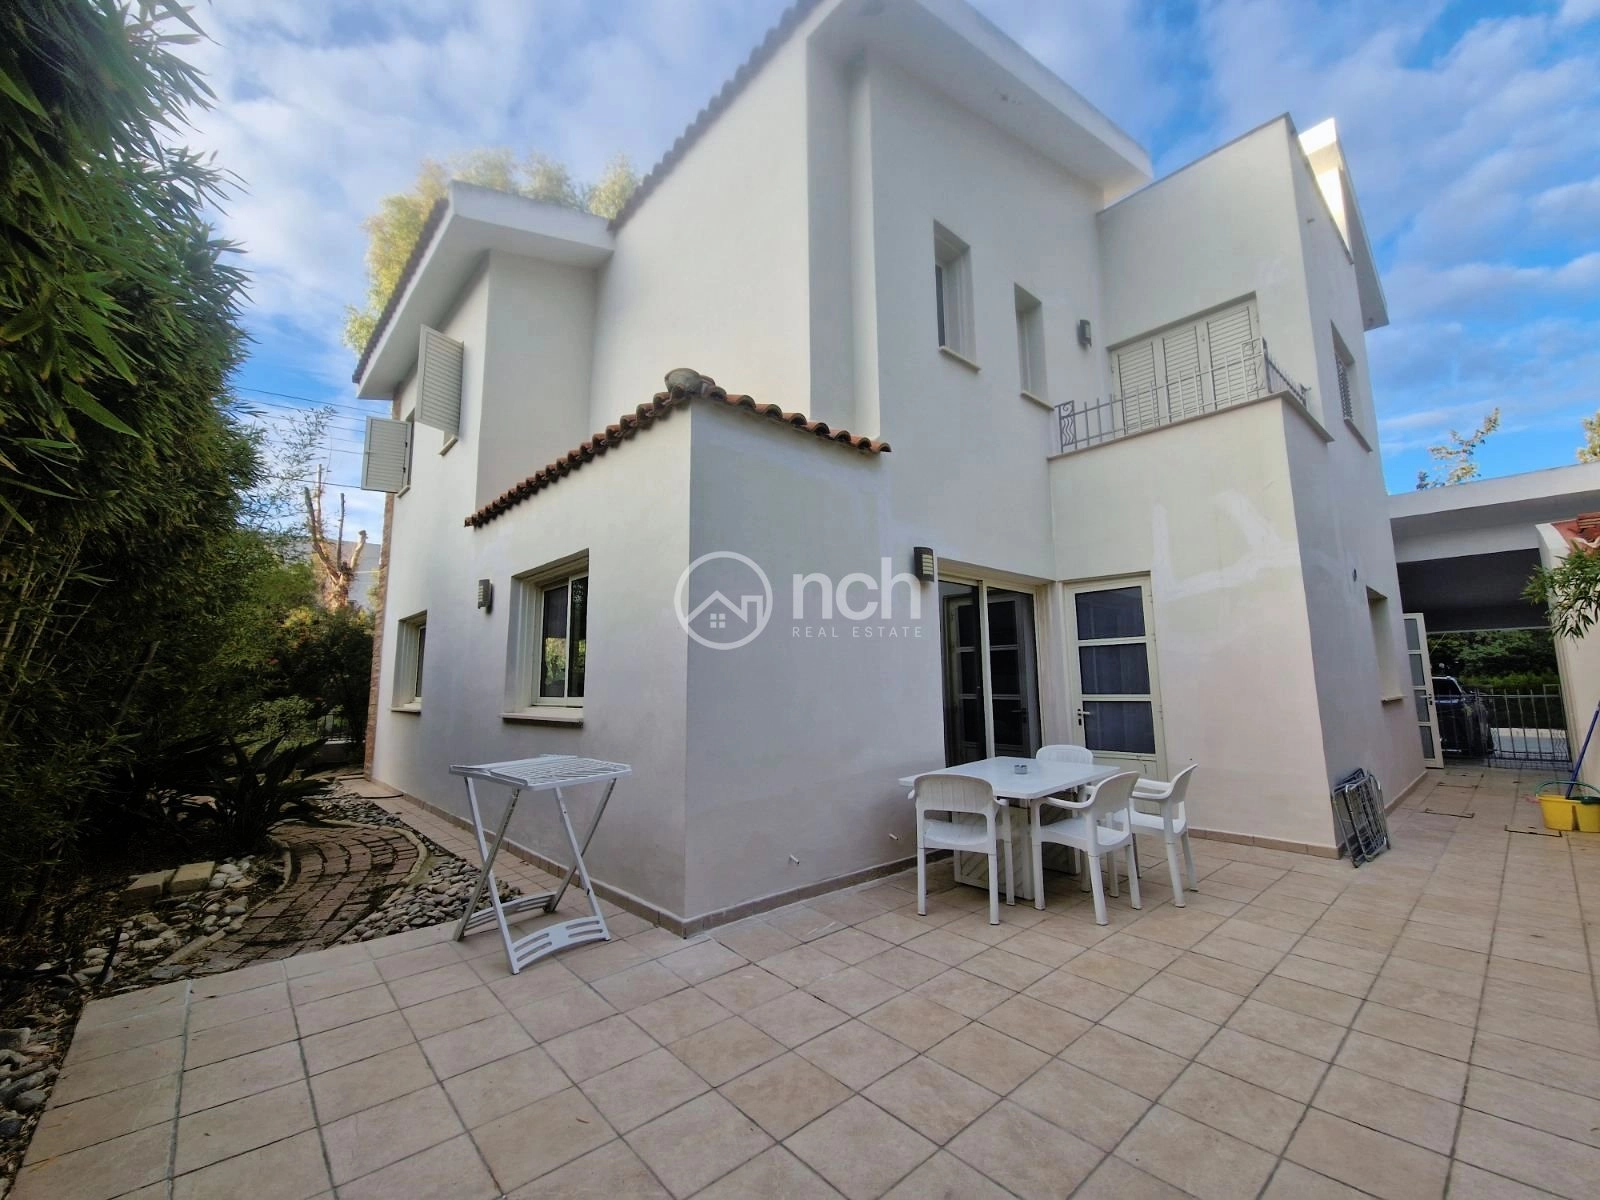 4 Bedroom House for Sale in Strovolos – Archangelos, Nicosia District